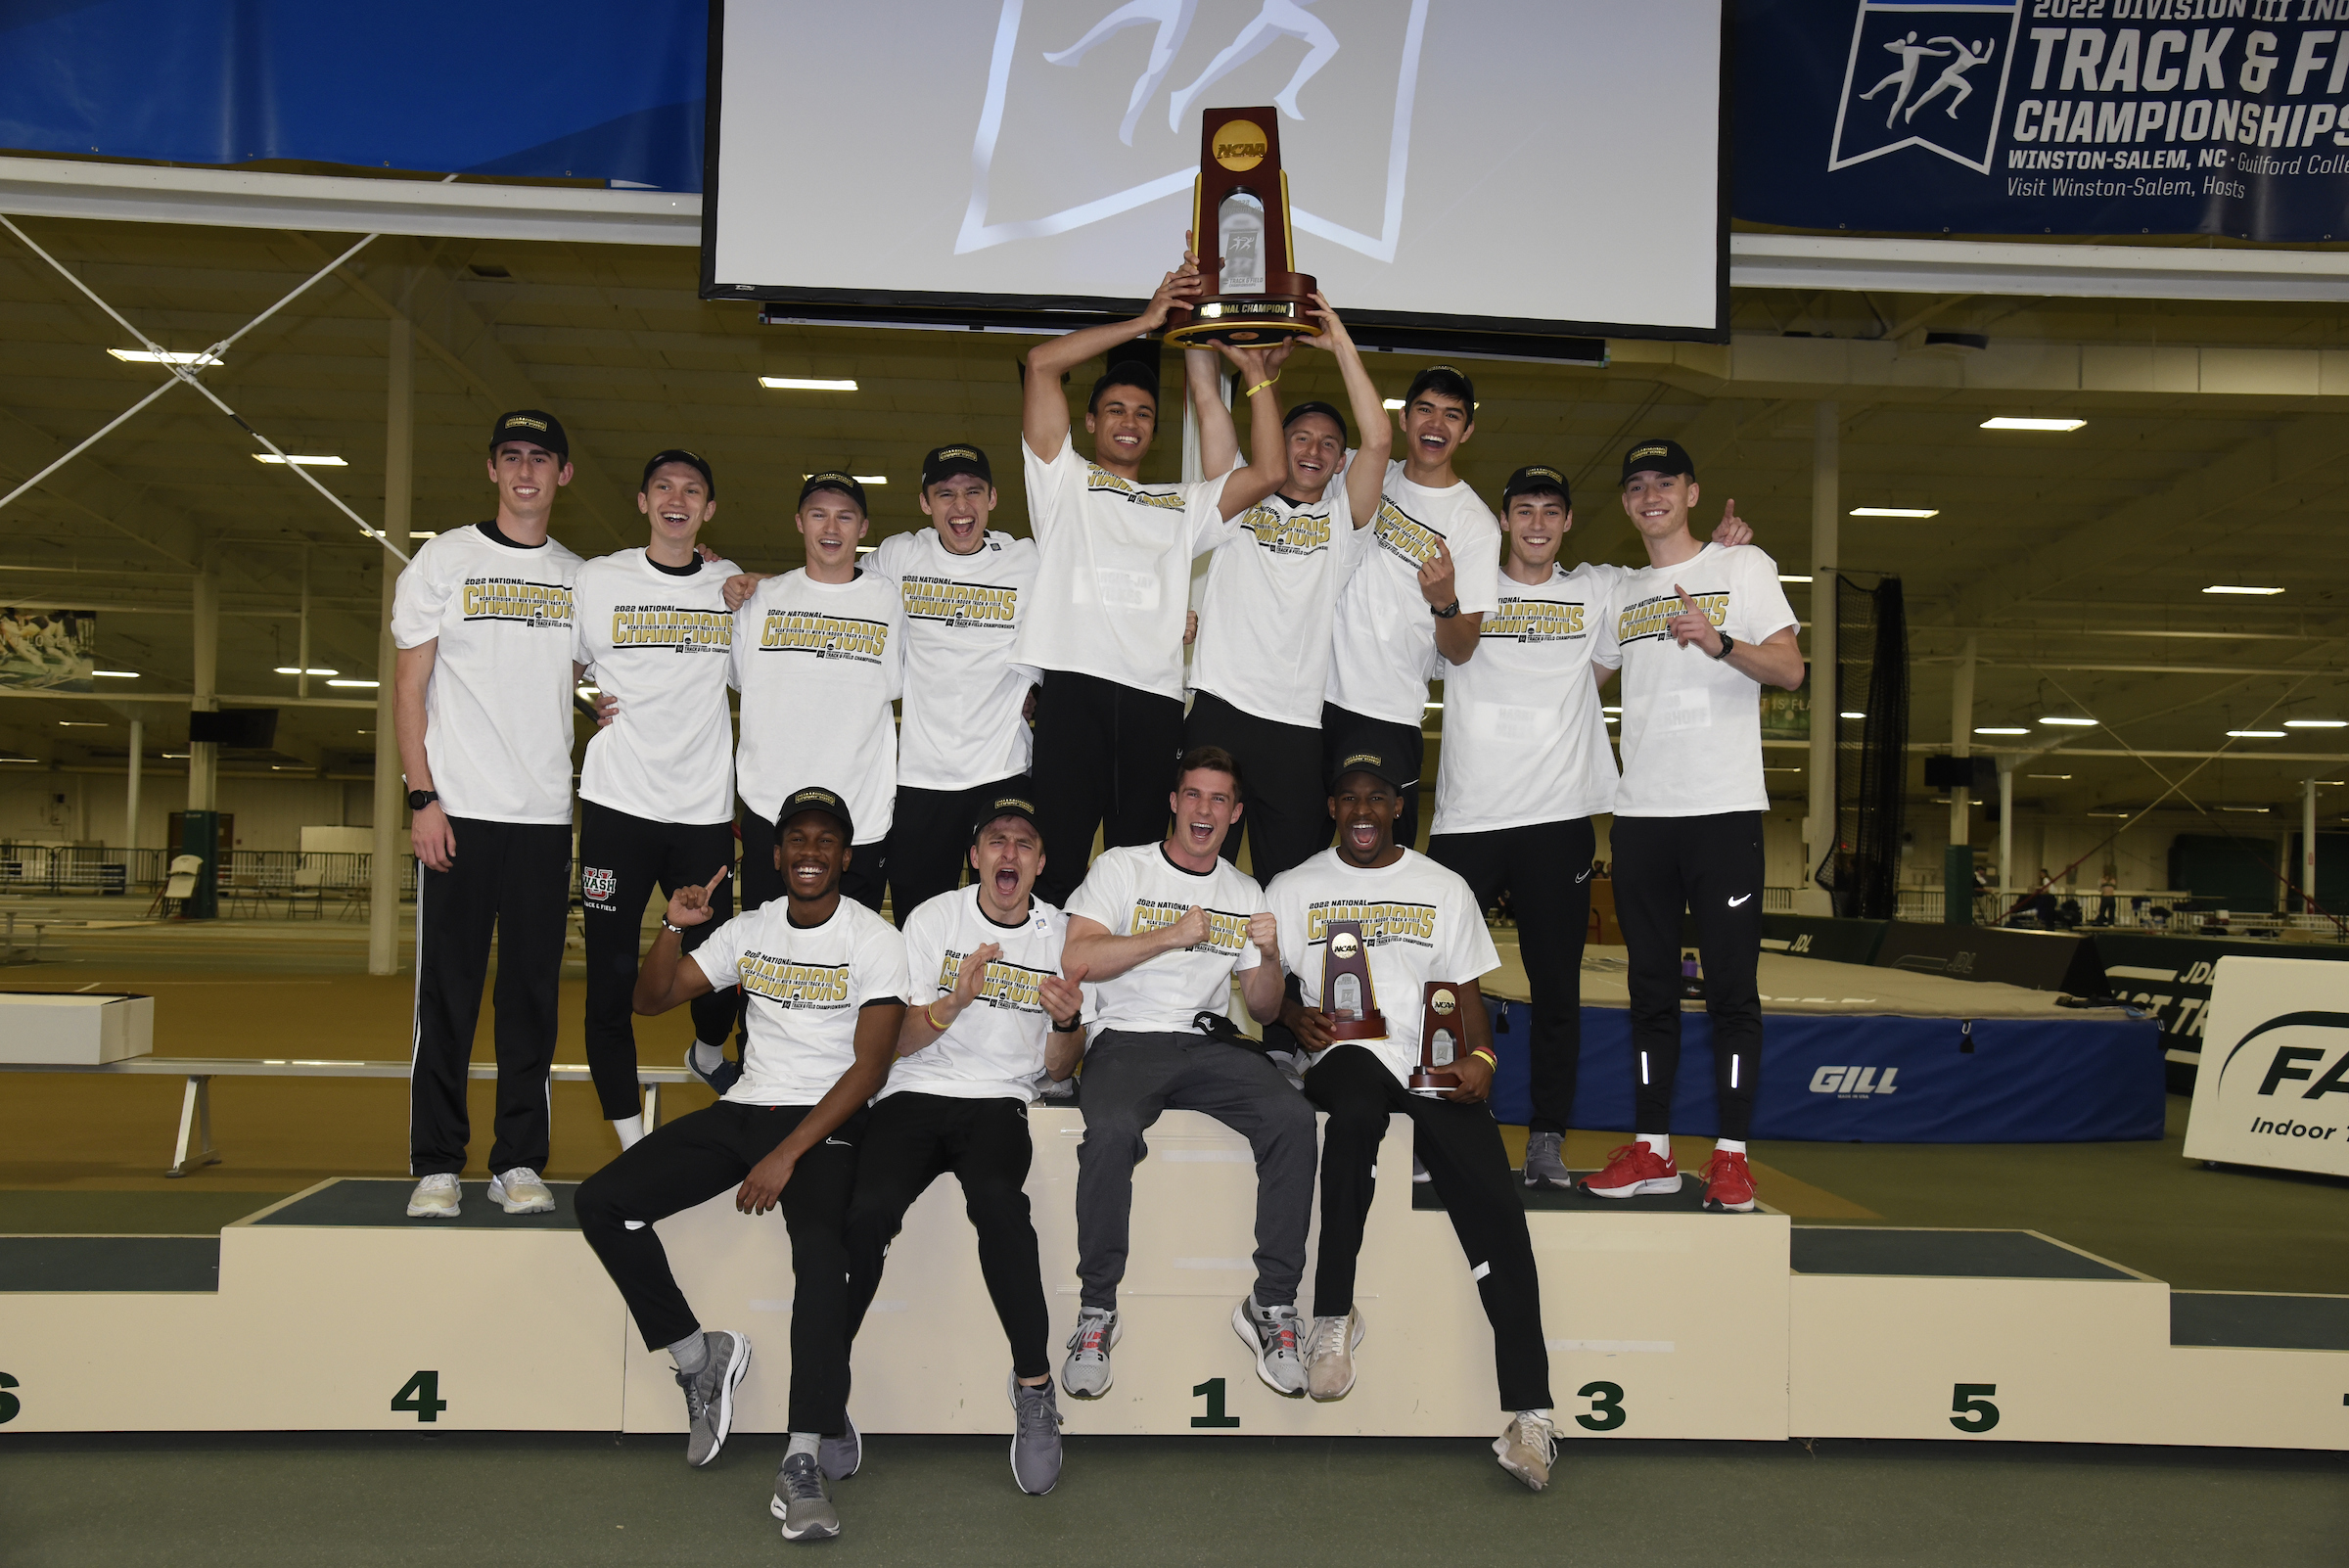 Four young men sit in a row in front of nine others, the middle three of whom hoist a trophy above their heads. The men wear white shirts and black pants. 